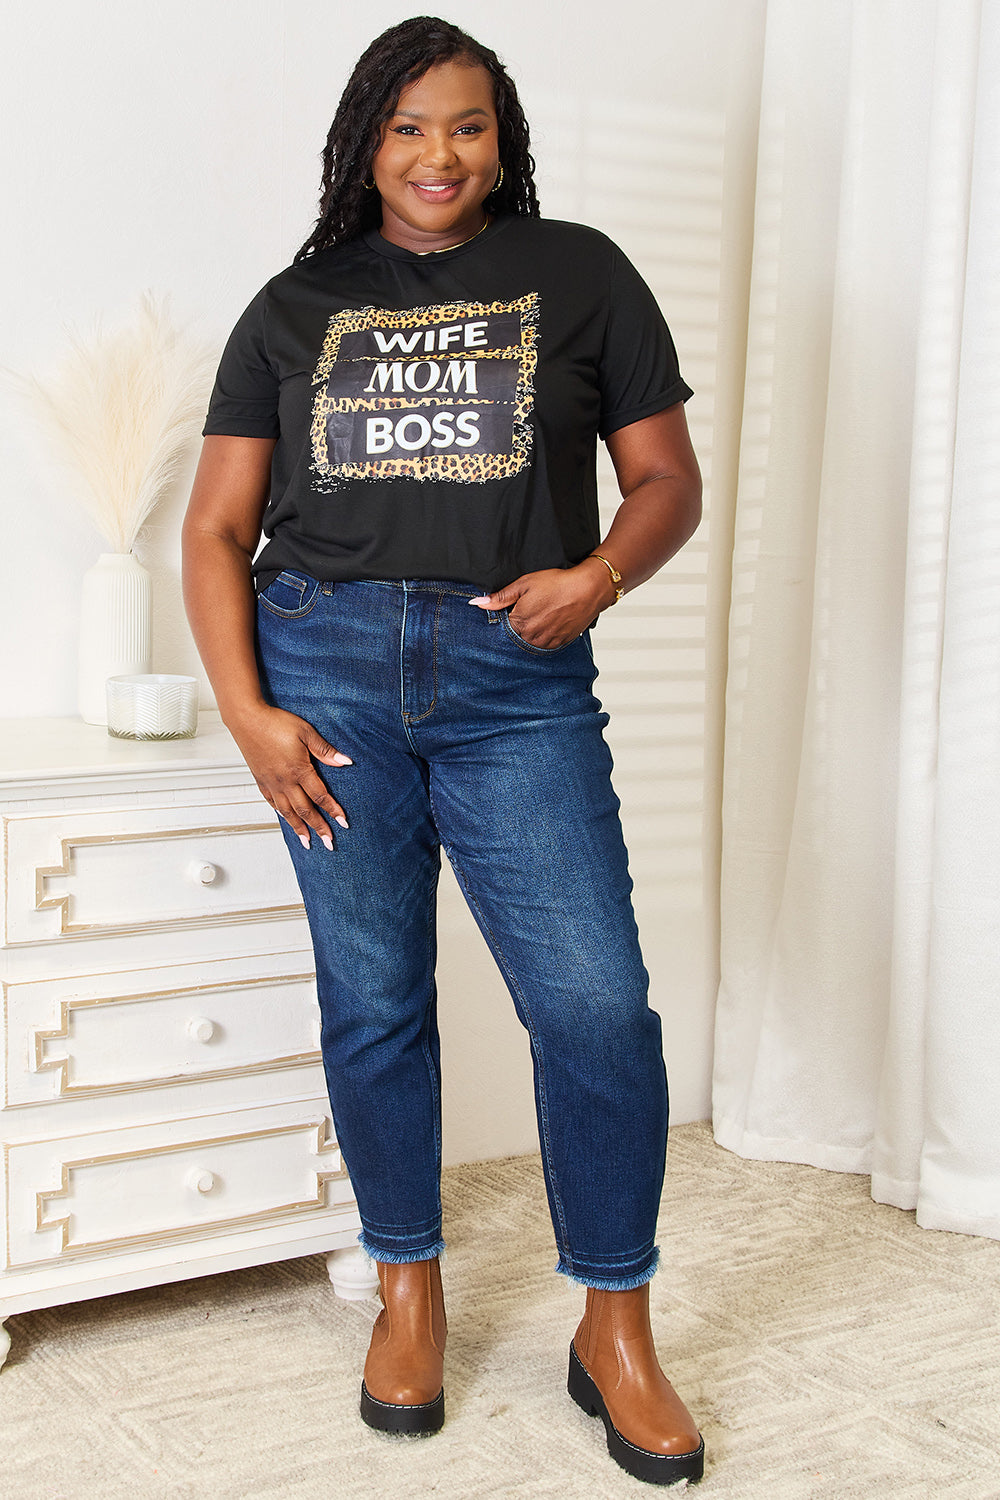 Simply Love WIFE MOM BOSS Leopard Graphic T-Shirt - SELFTRITSS